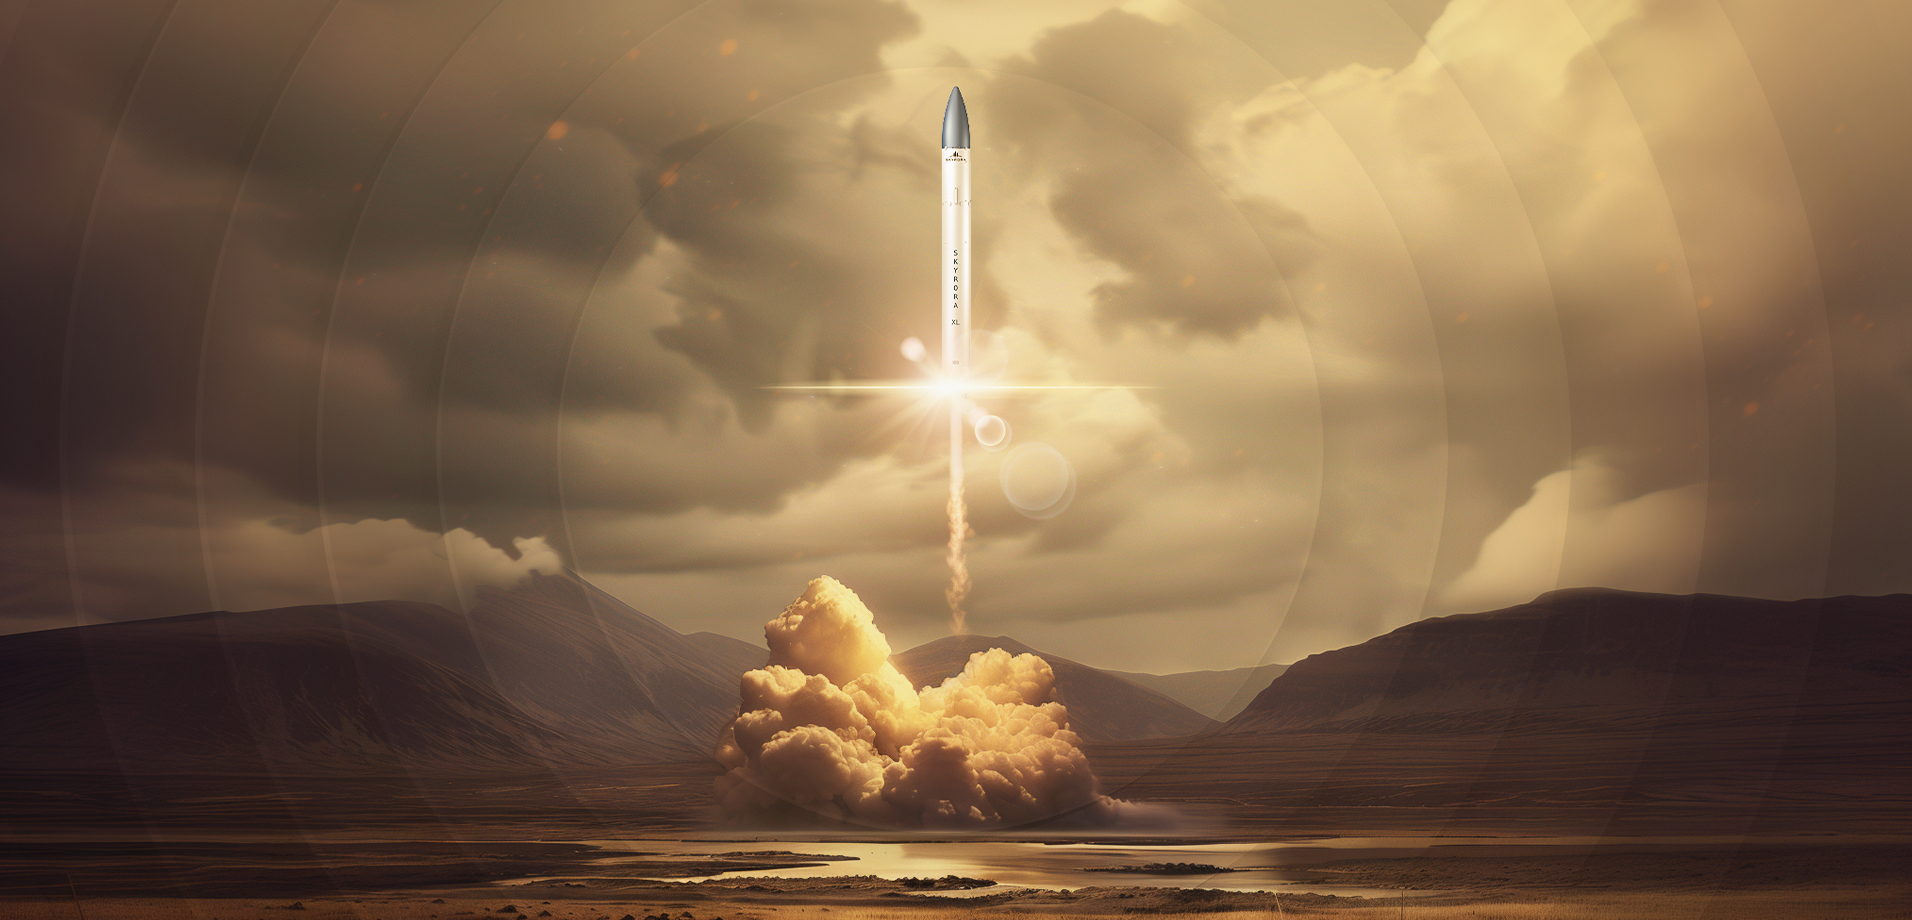 Spaceport 1: The rocket launch site you’ve probably never heard of